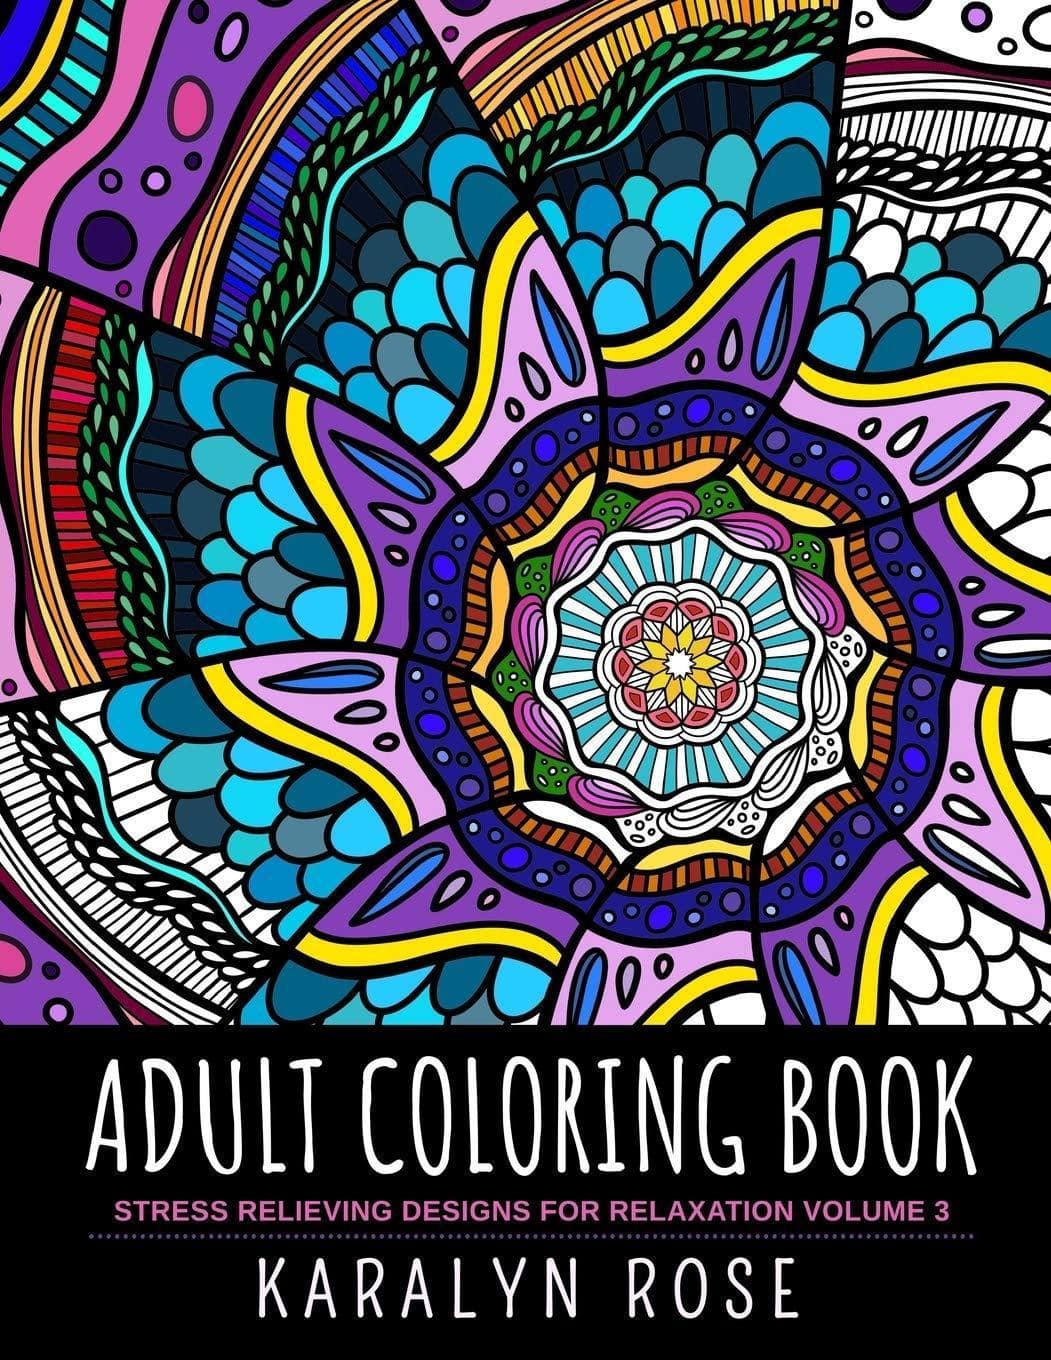 Adult Coloring Book: Stress Relieving Designs for Relaxation Vol - SureShot Books Publishing LLC